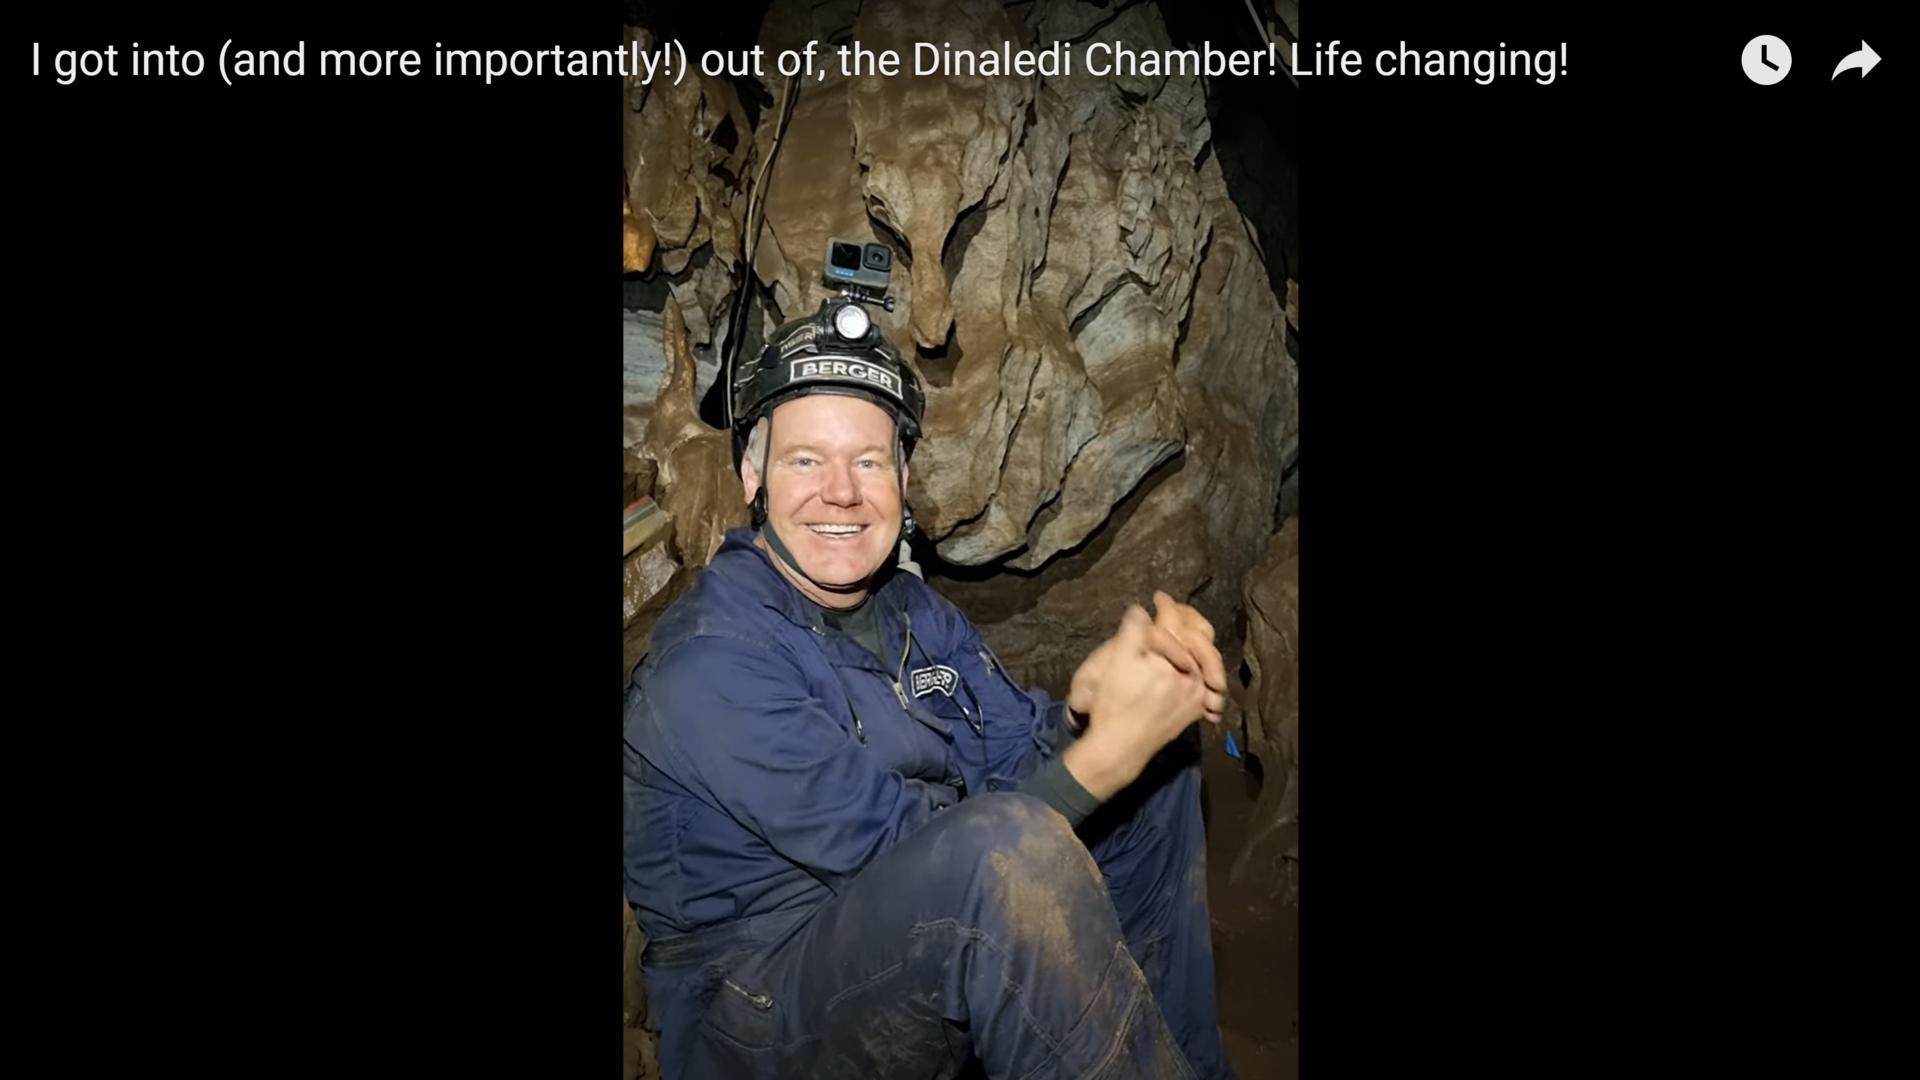 5.2.3 Live from the Rising Star Cave. 3- In and Out of the Dinaledi Chamber